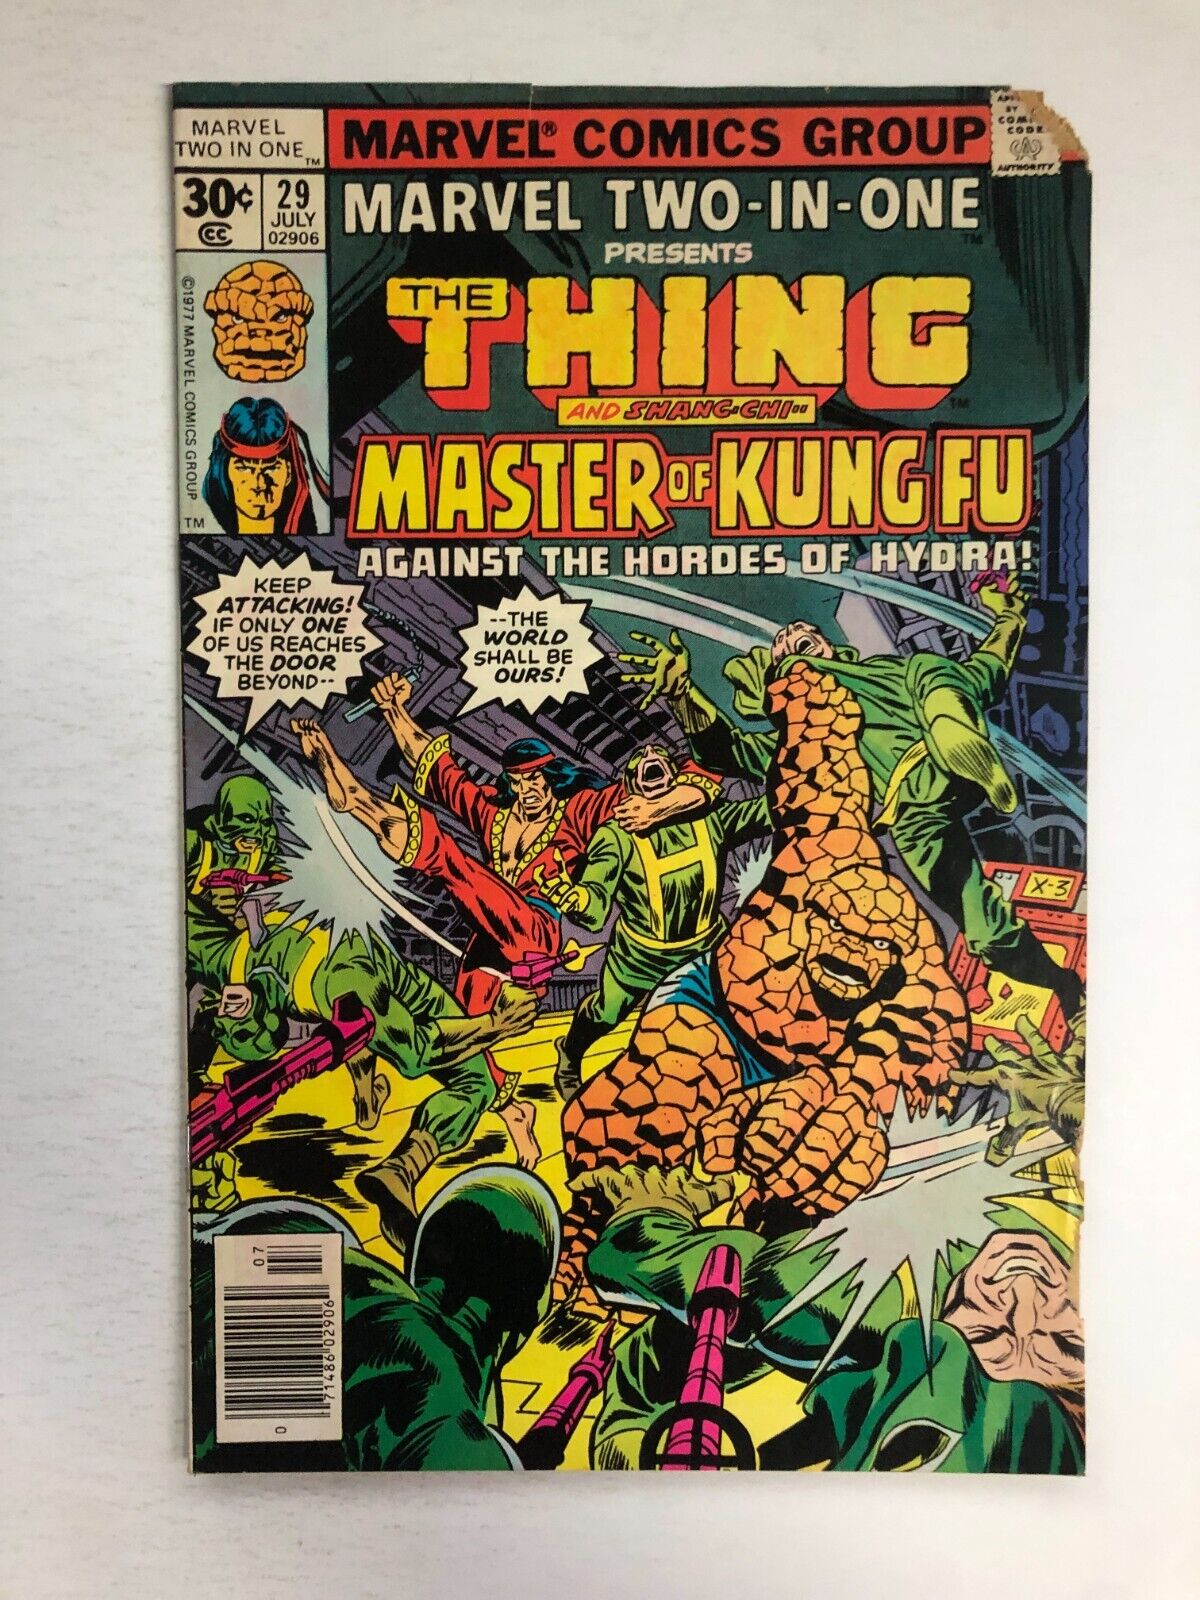 Marvel Two-In-One: The Thing and Shang-Chi #29 - 1977 - Marvel Comics